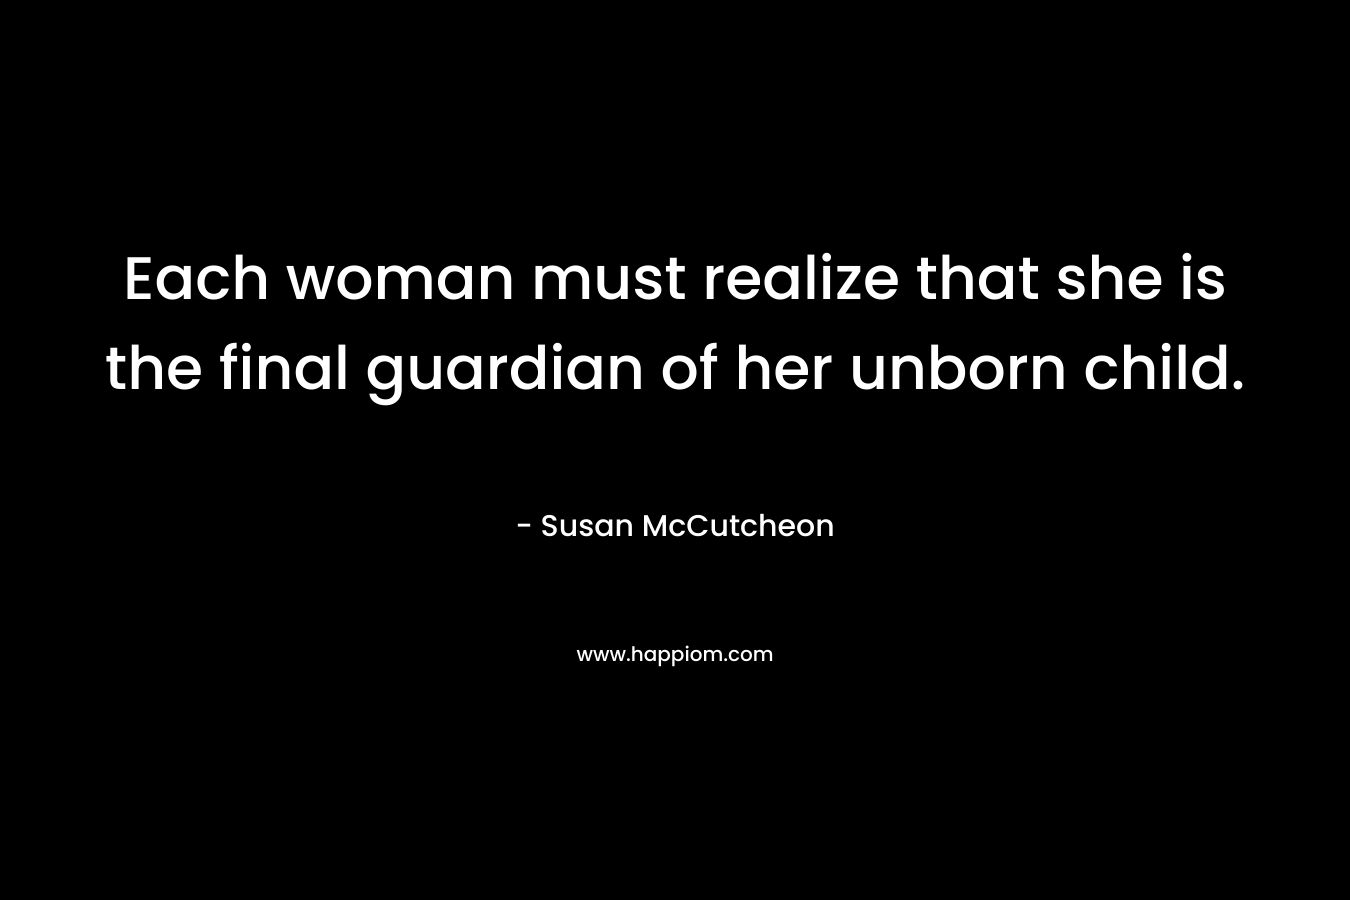 Each woman must realize that she is the final guardian of her unborn child. – Susan McCutcheon